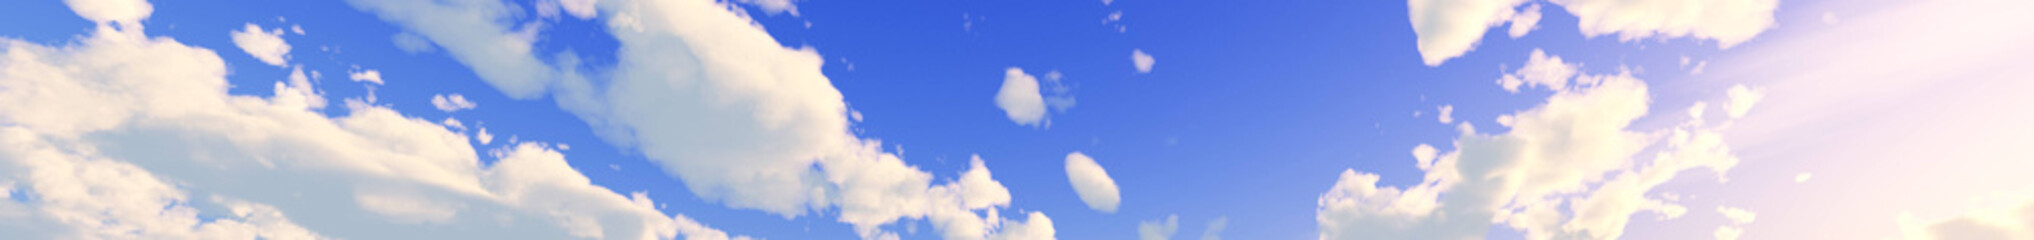 Sky with clouds, sky panorama, 3D rendering - 761661387